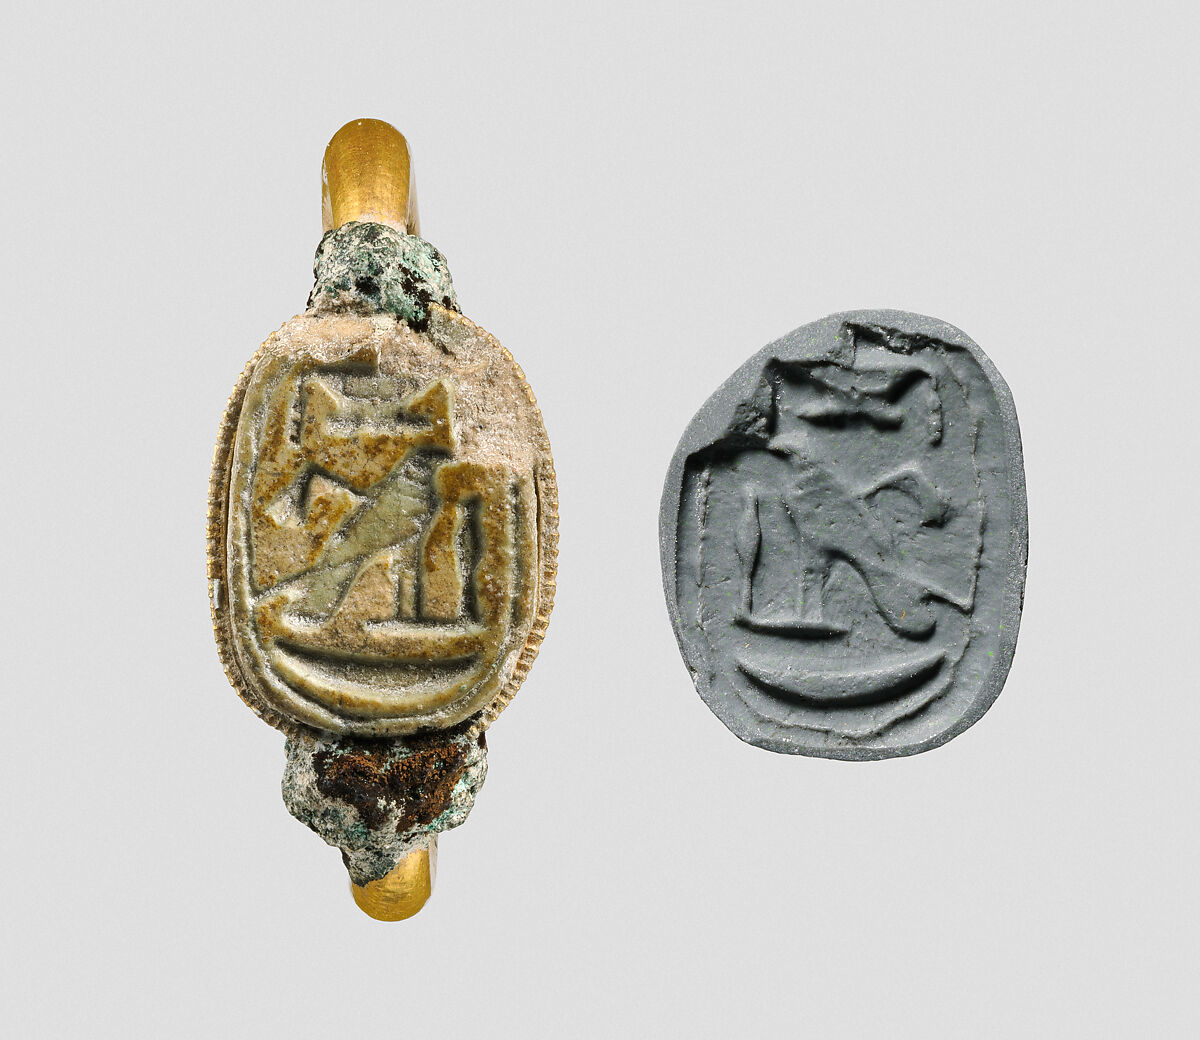 Gold ring with glass scarab, Gold, glass paste, Cypriot 